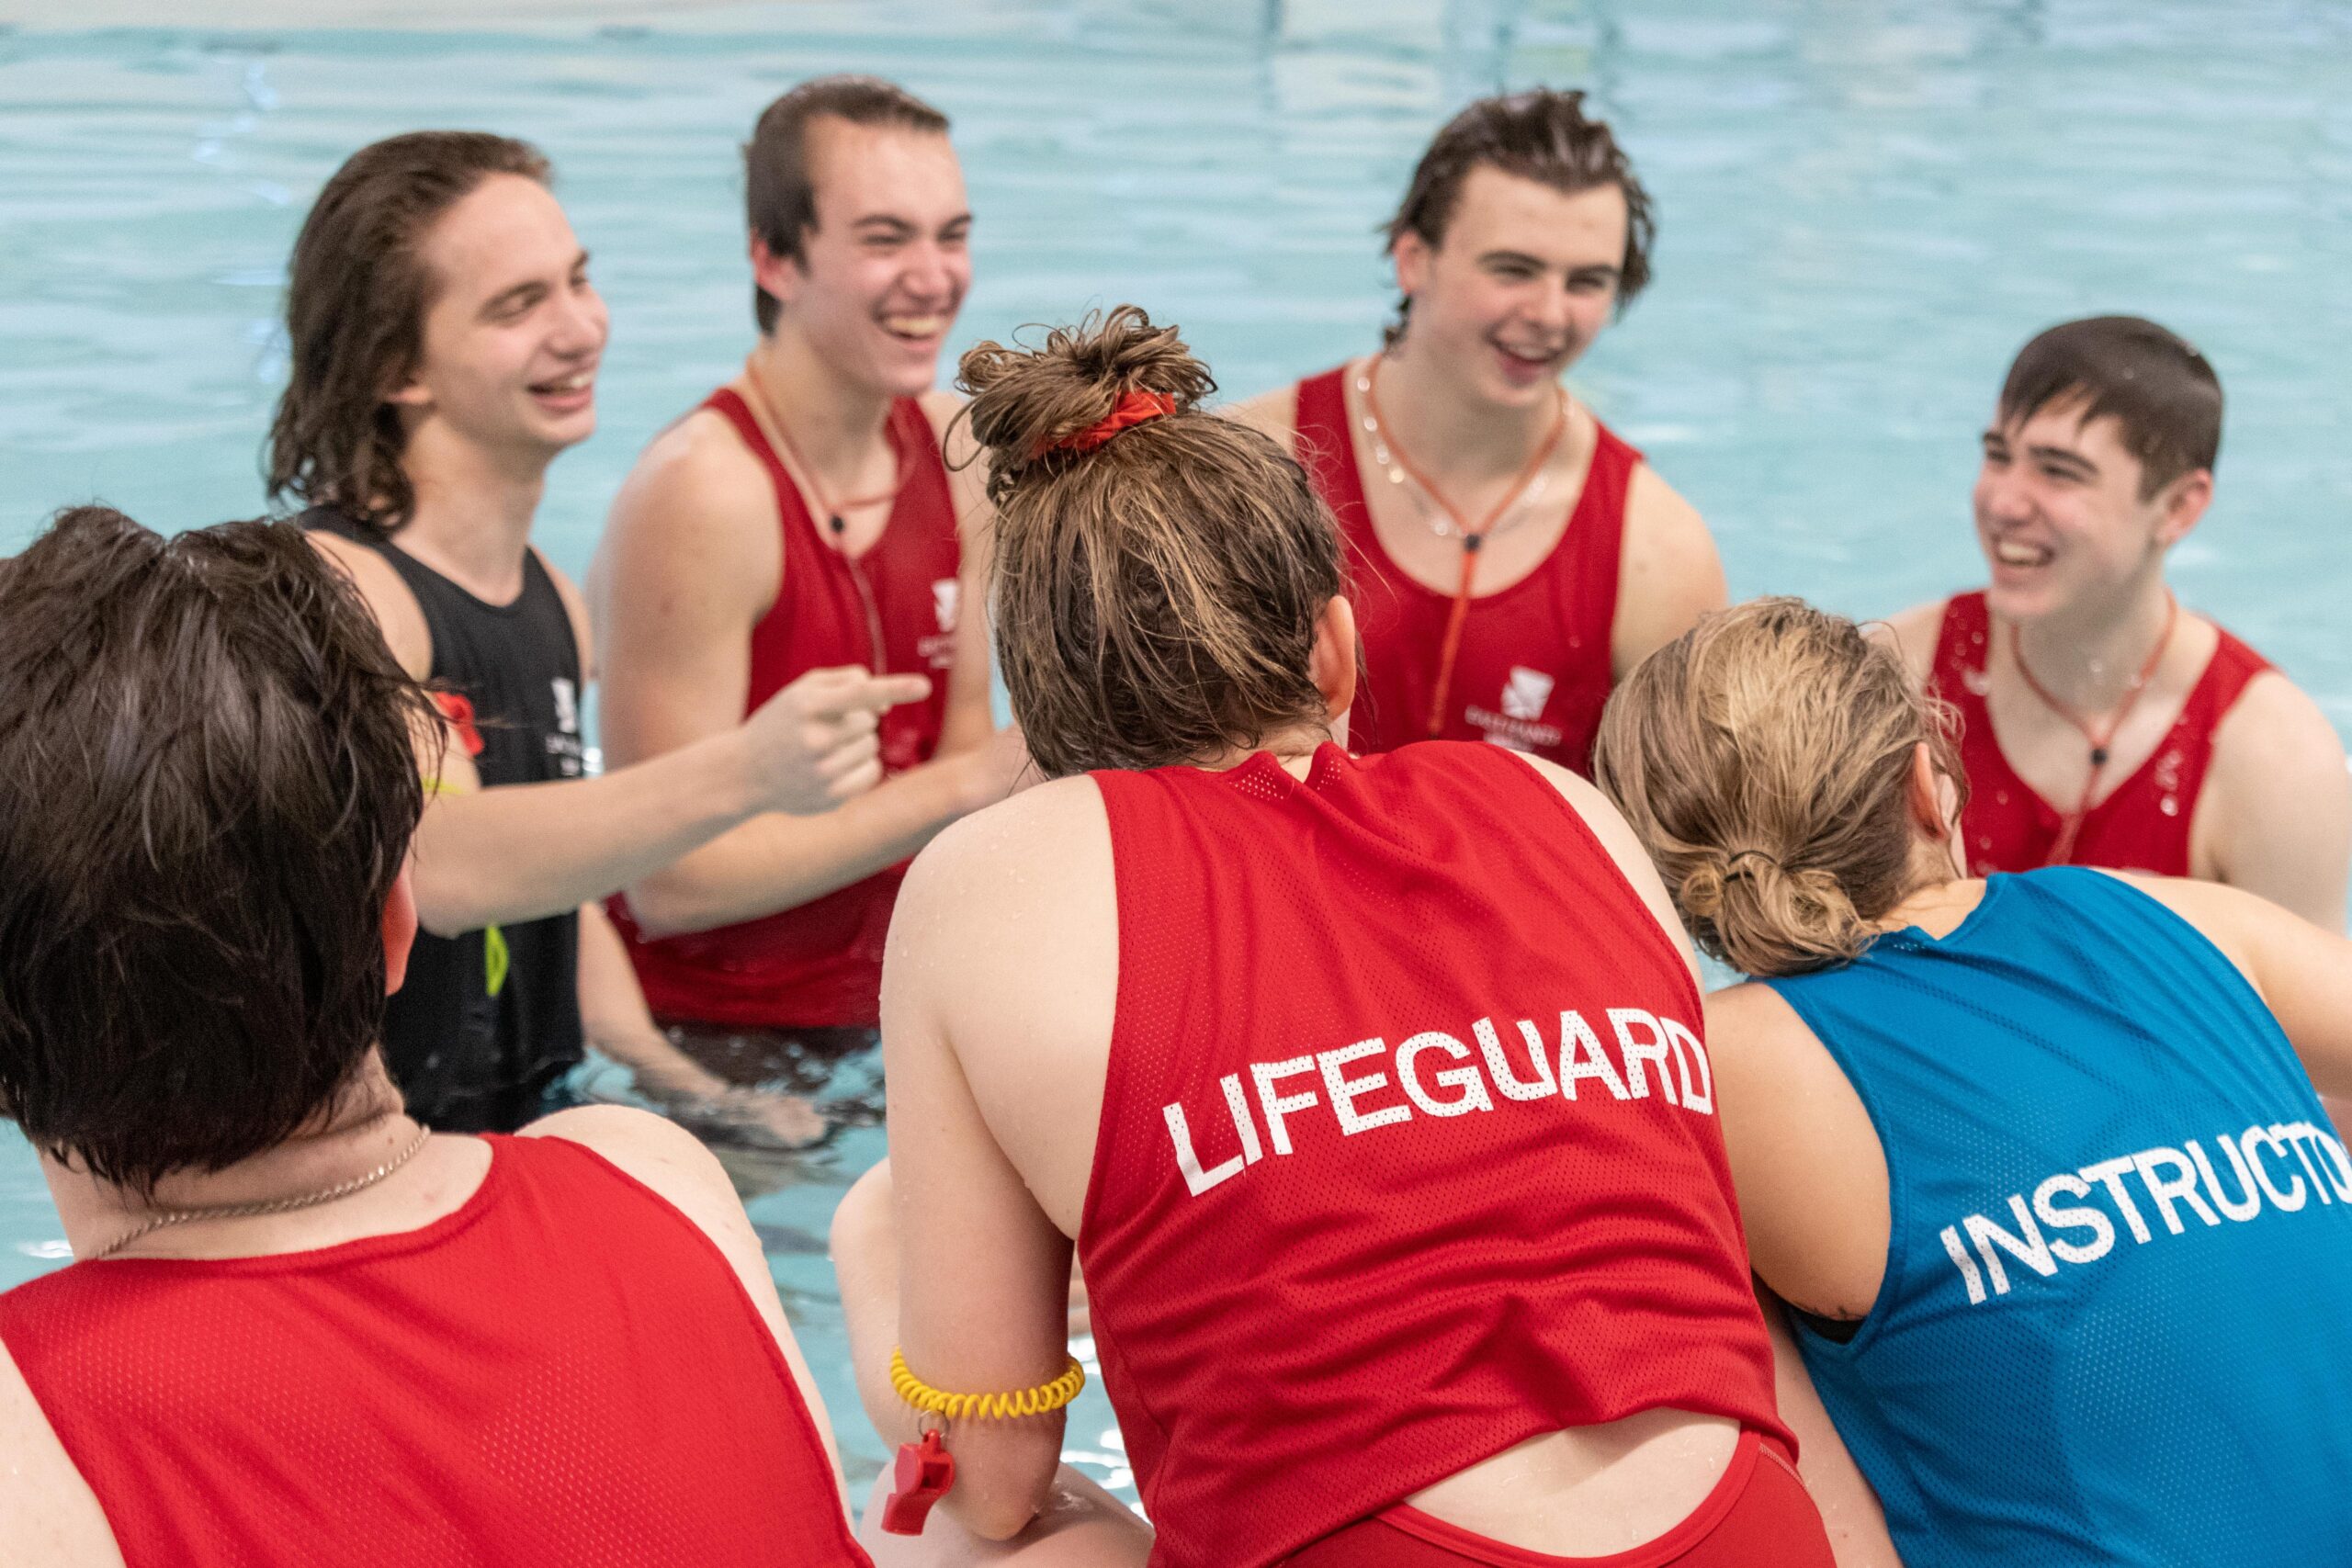 A group of lifeguards and instructors laughing